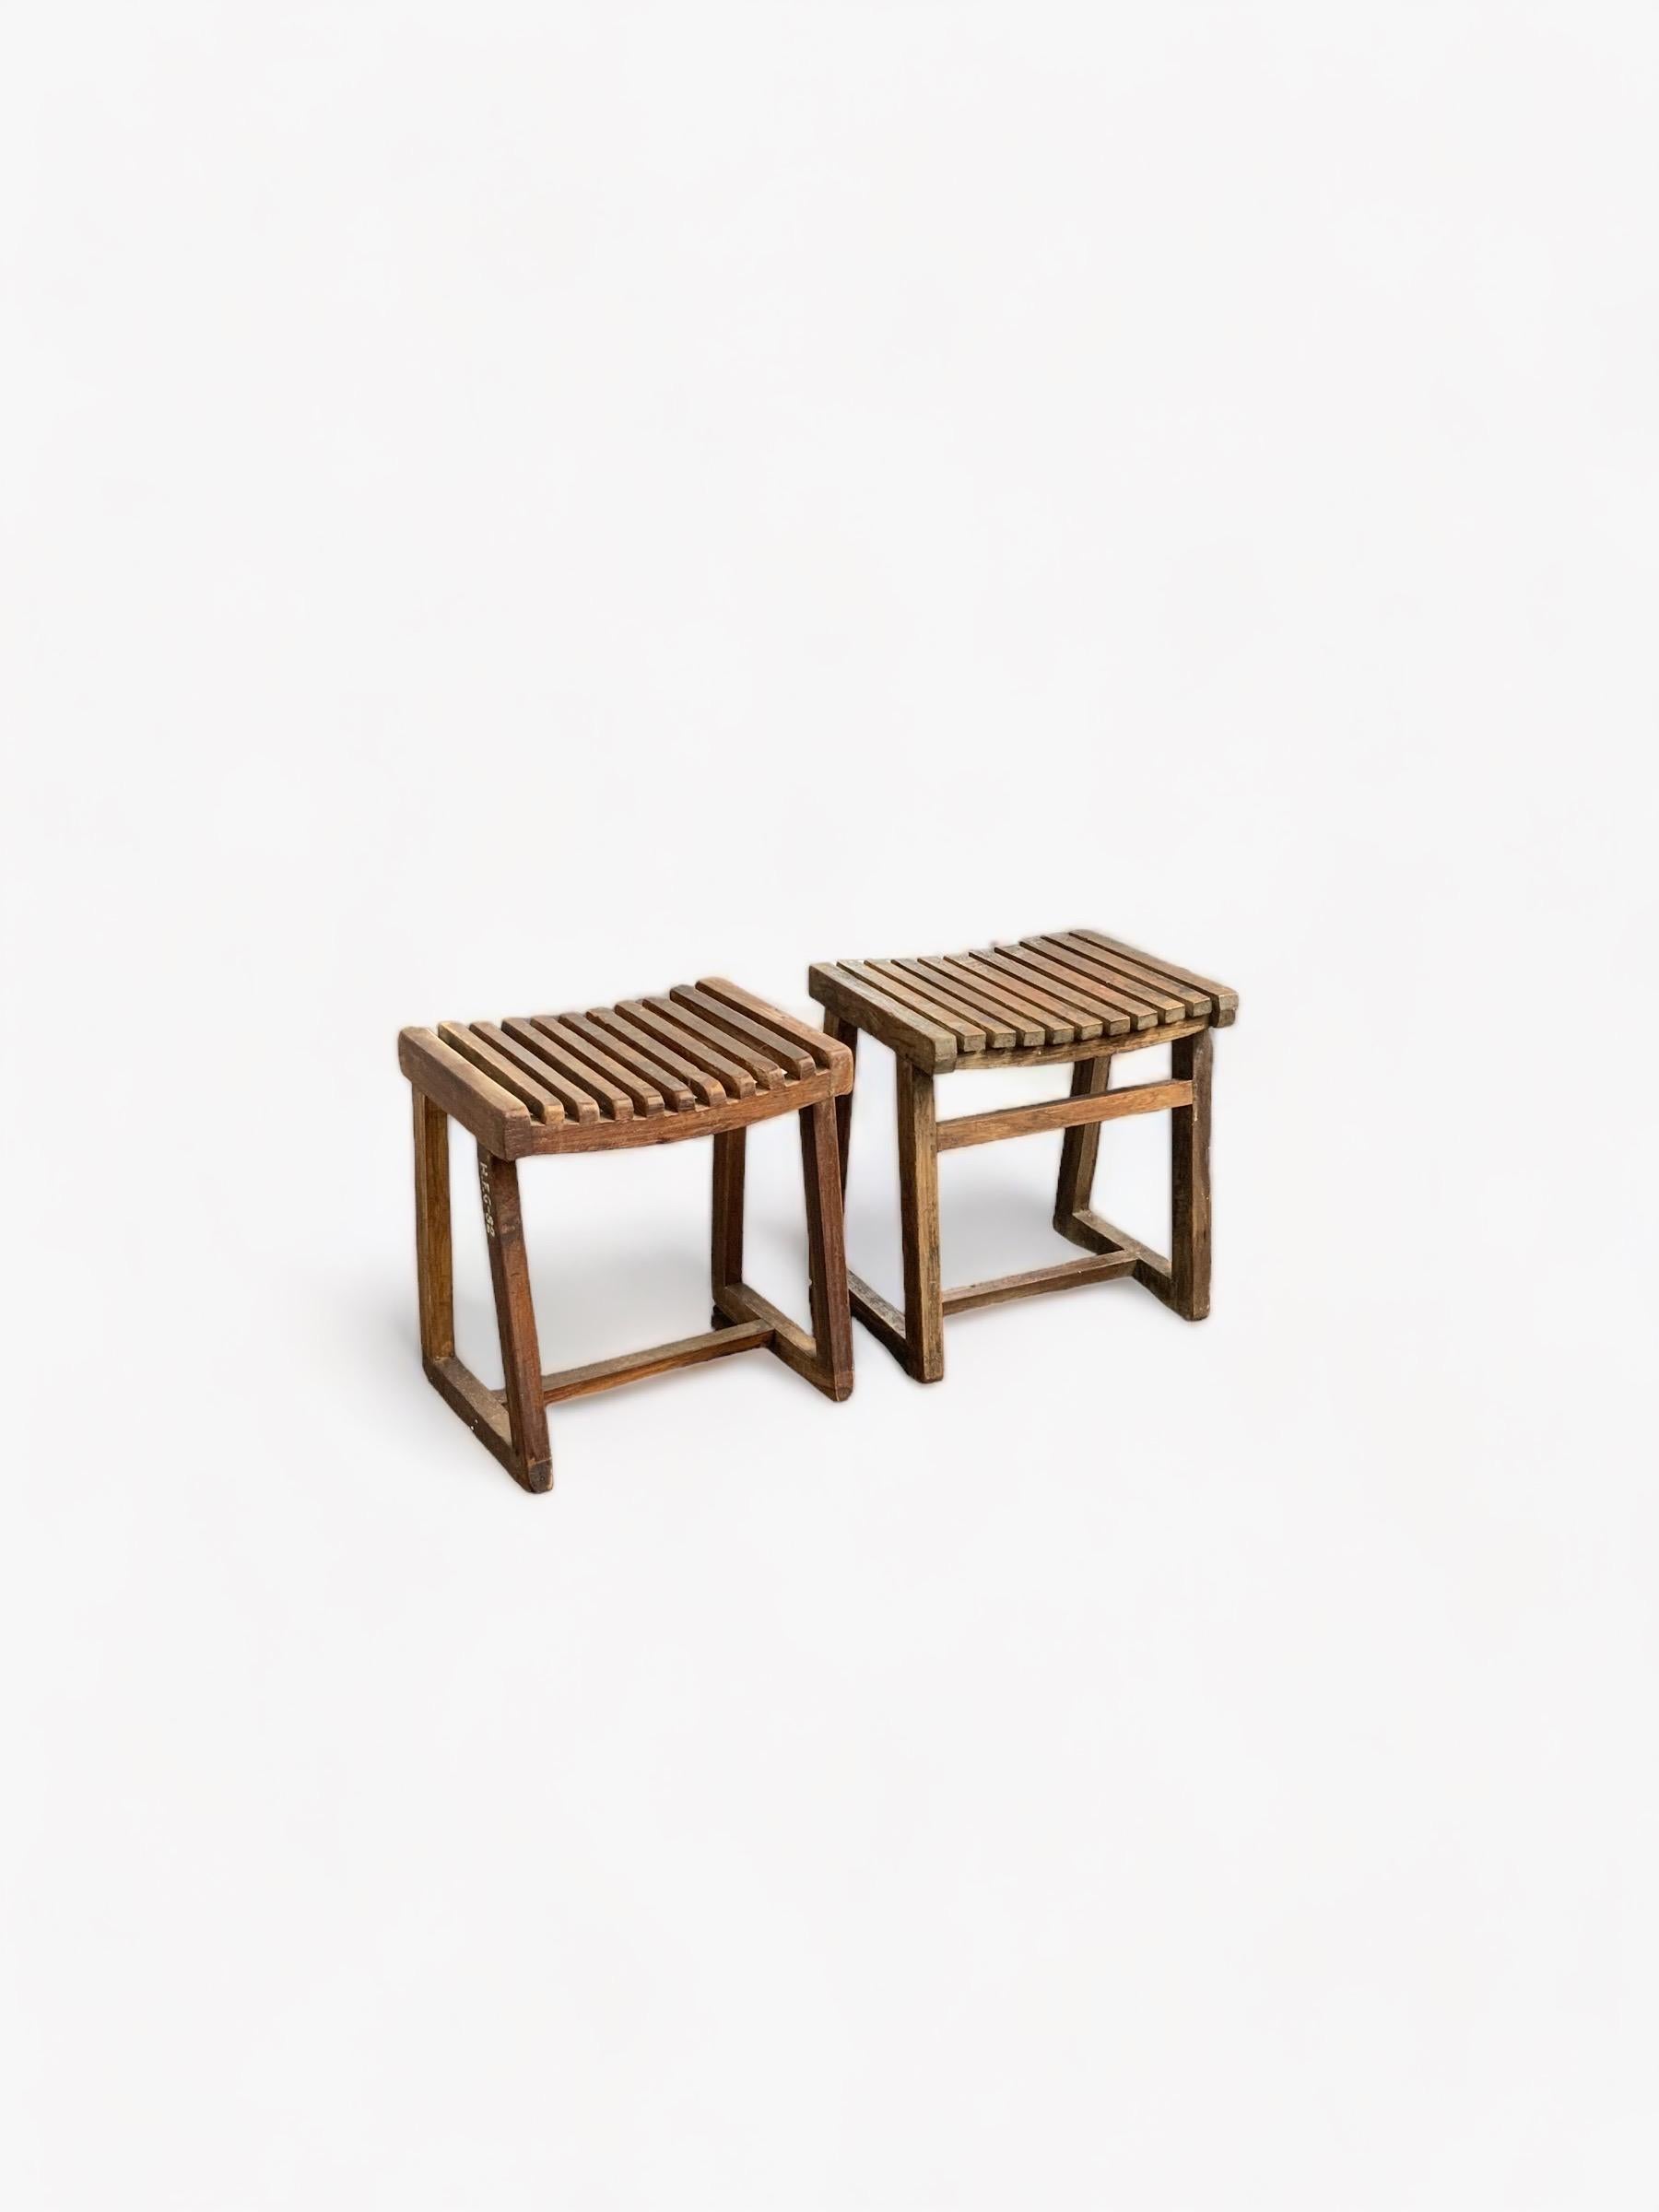 Set of two - Pierre Jeanneret Low Slatted Teak Stools In Good Condition For Sale In New York, NY